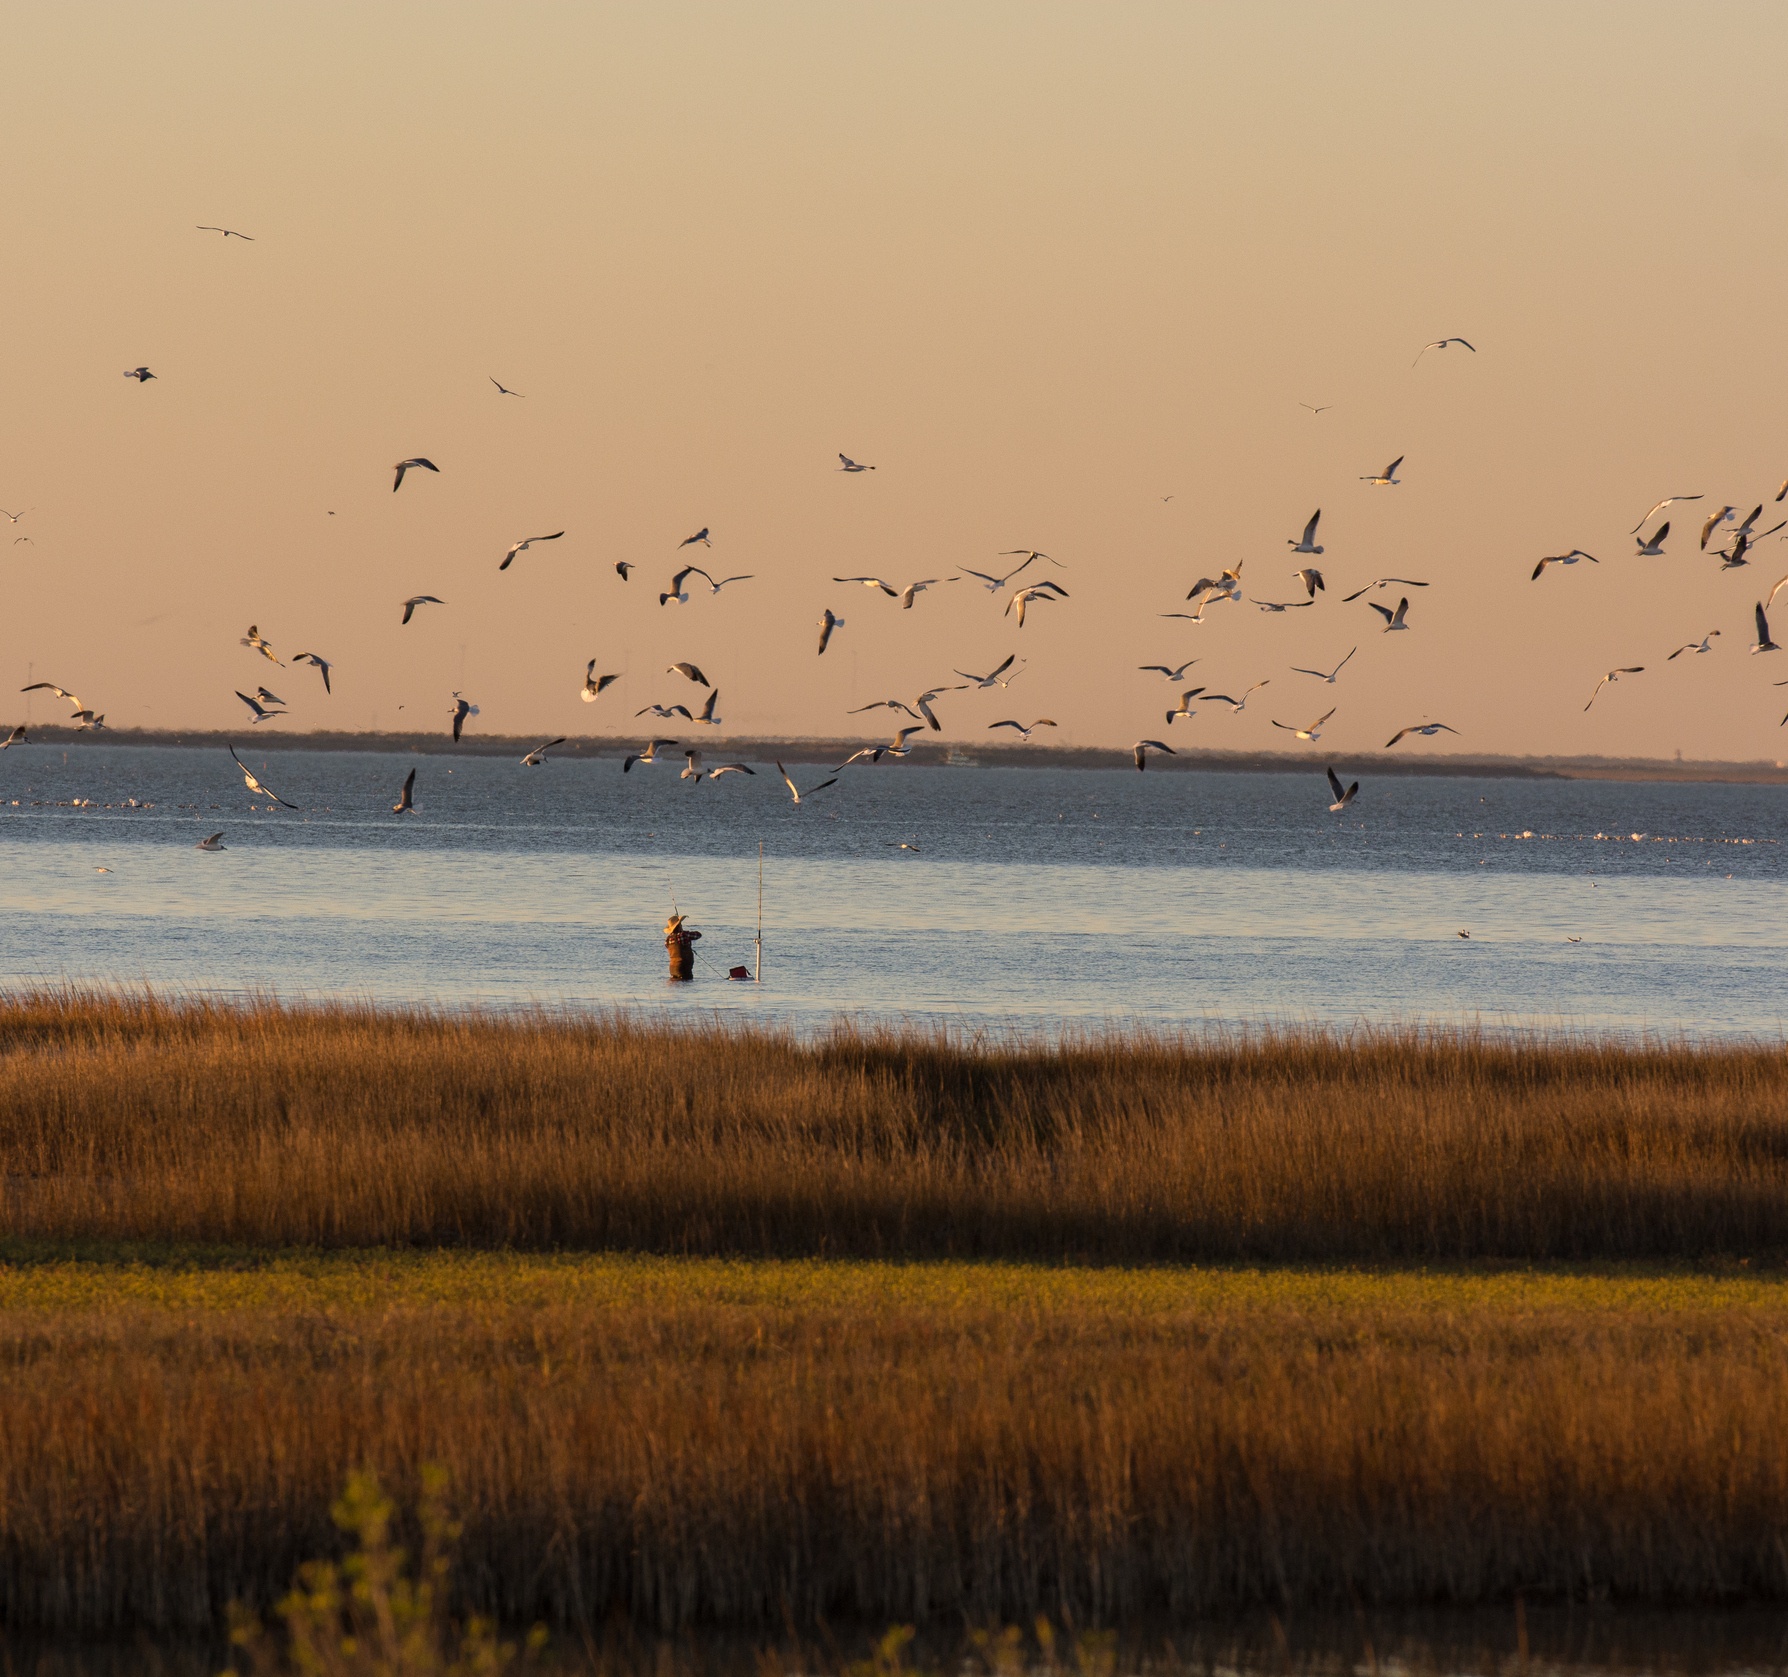 A flock of seagulls take flight as a lone fisherman standing a few yards past the marshy shoreline makes a cast into Galveston Bay